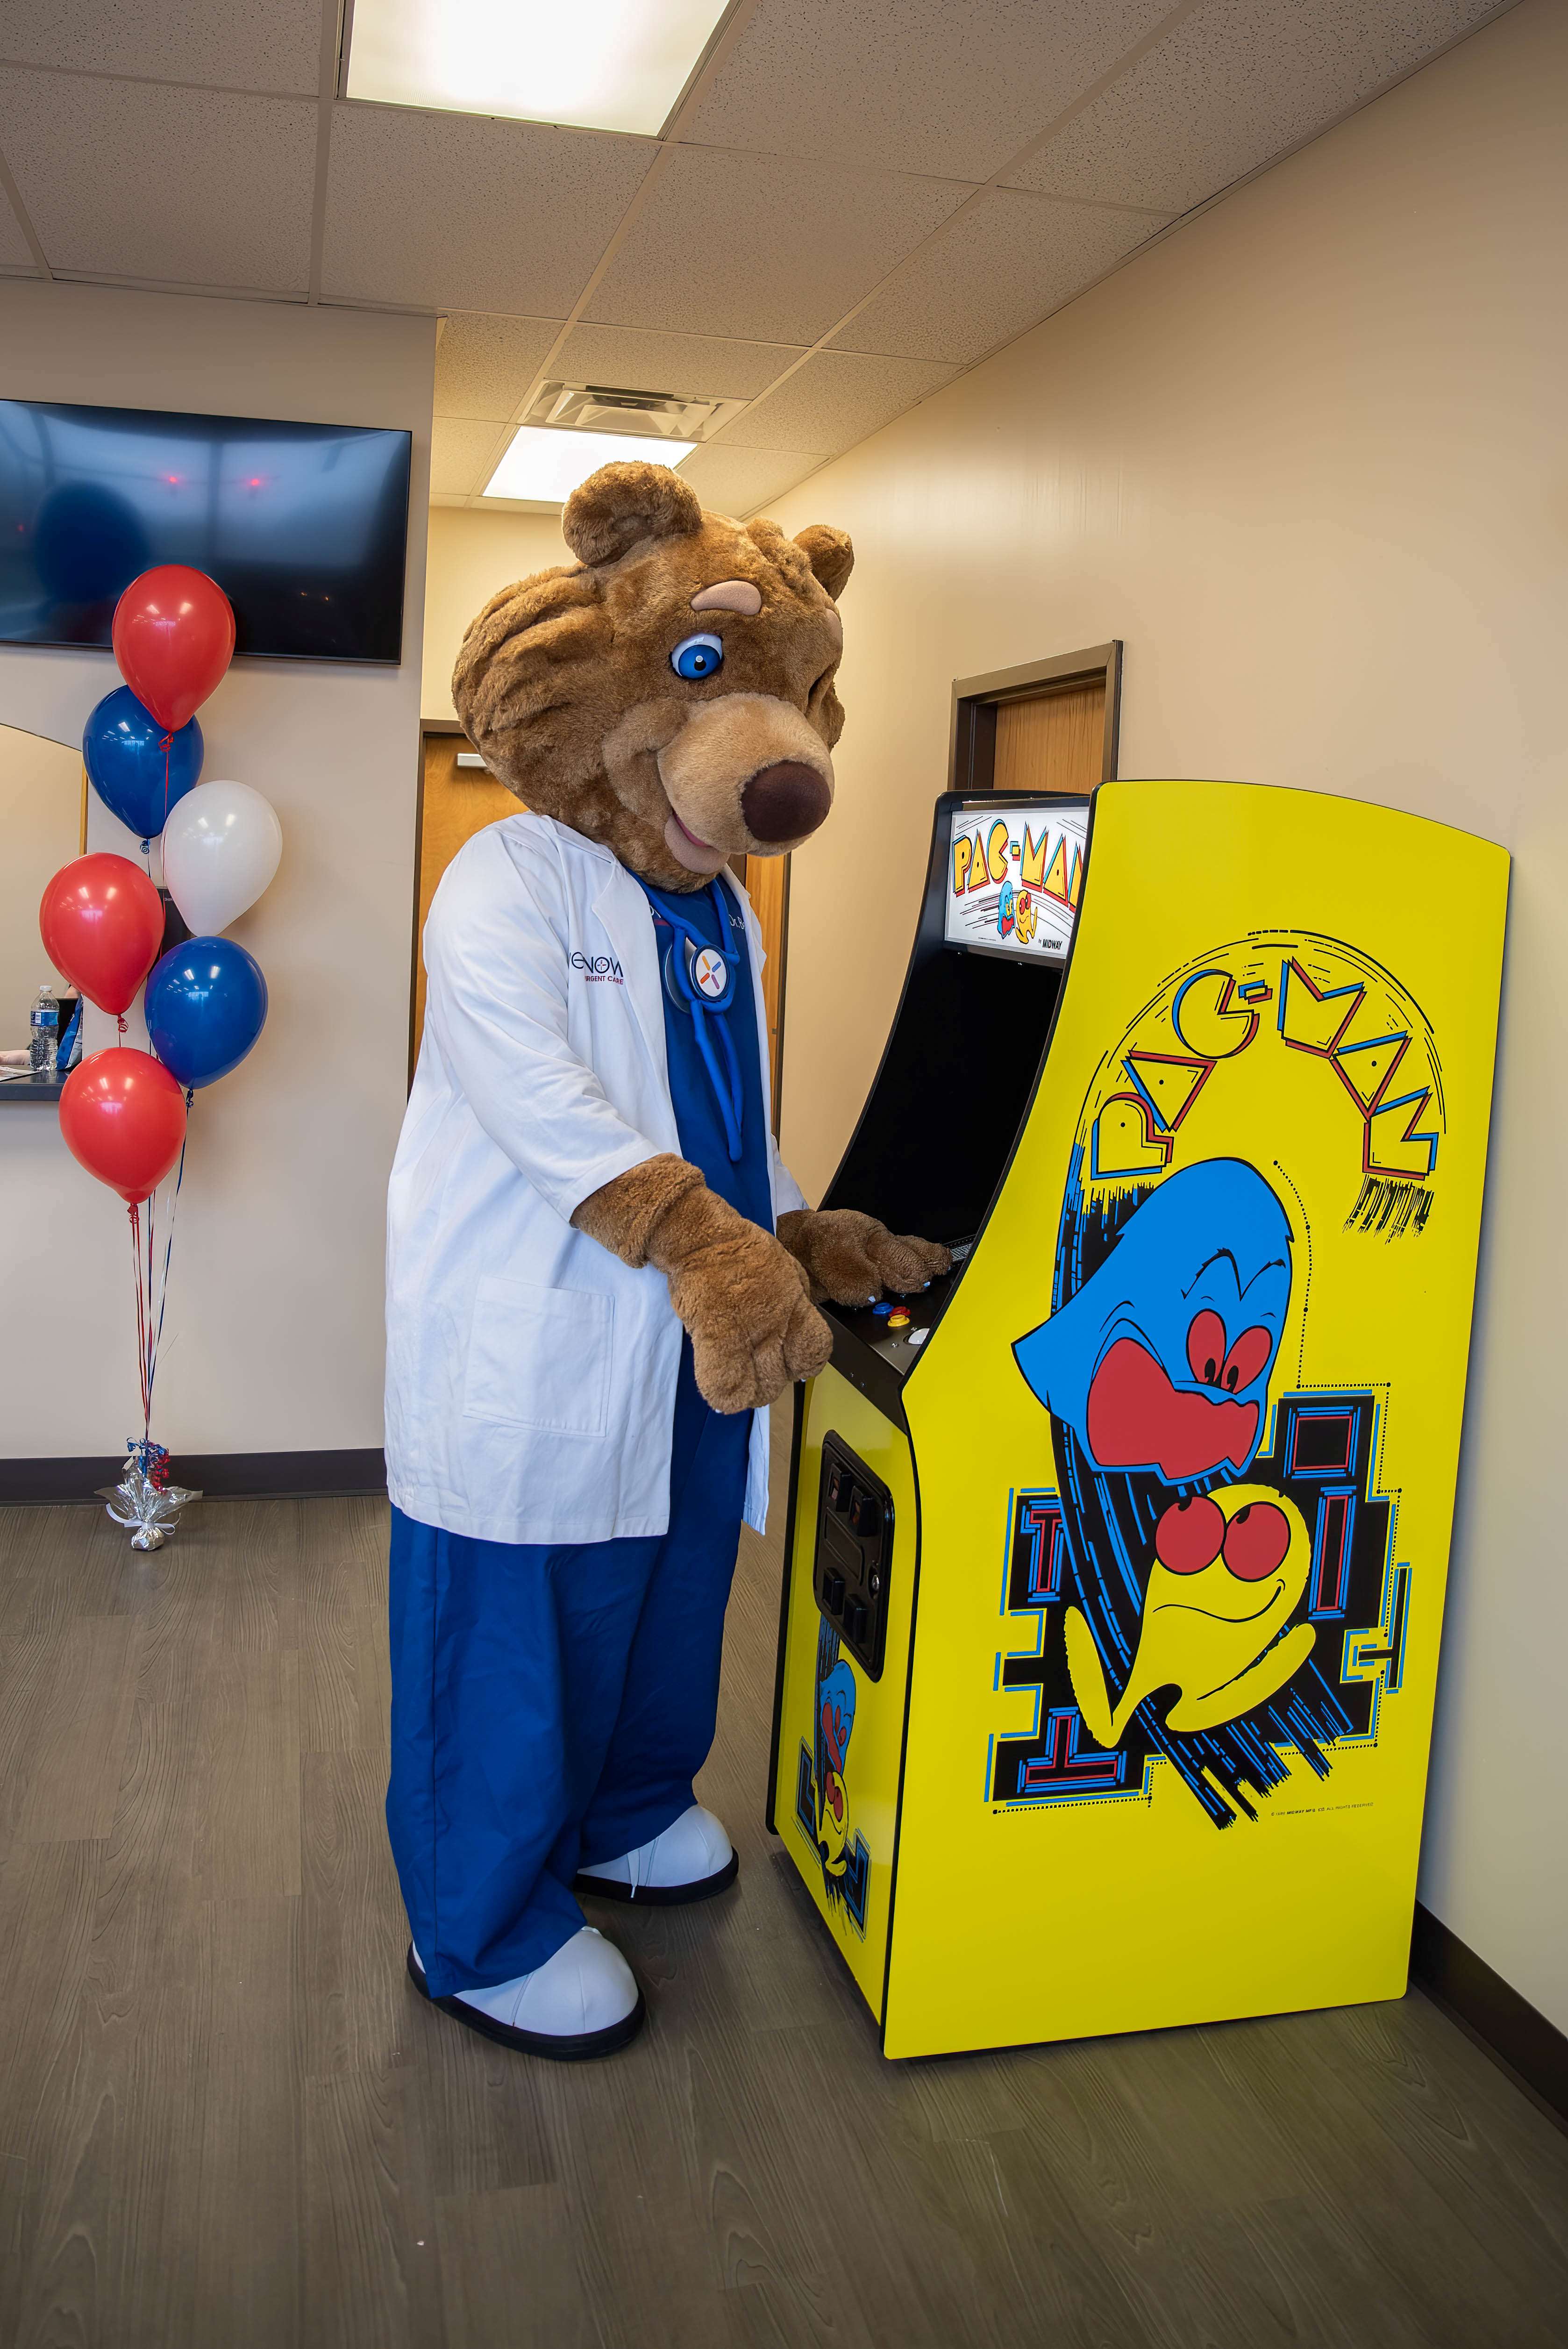 Dr. Bearywell playing his favorite video game Pacman